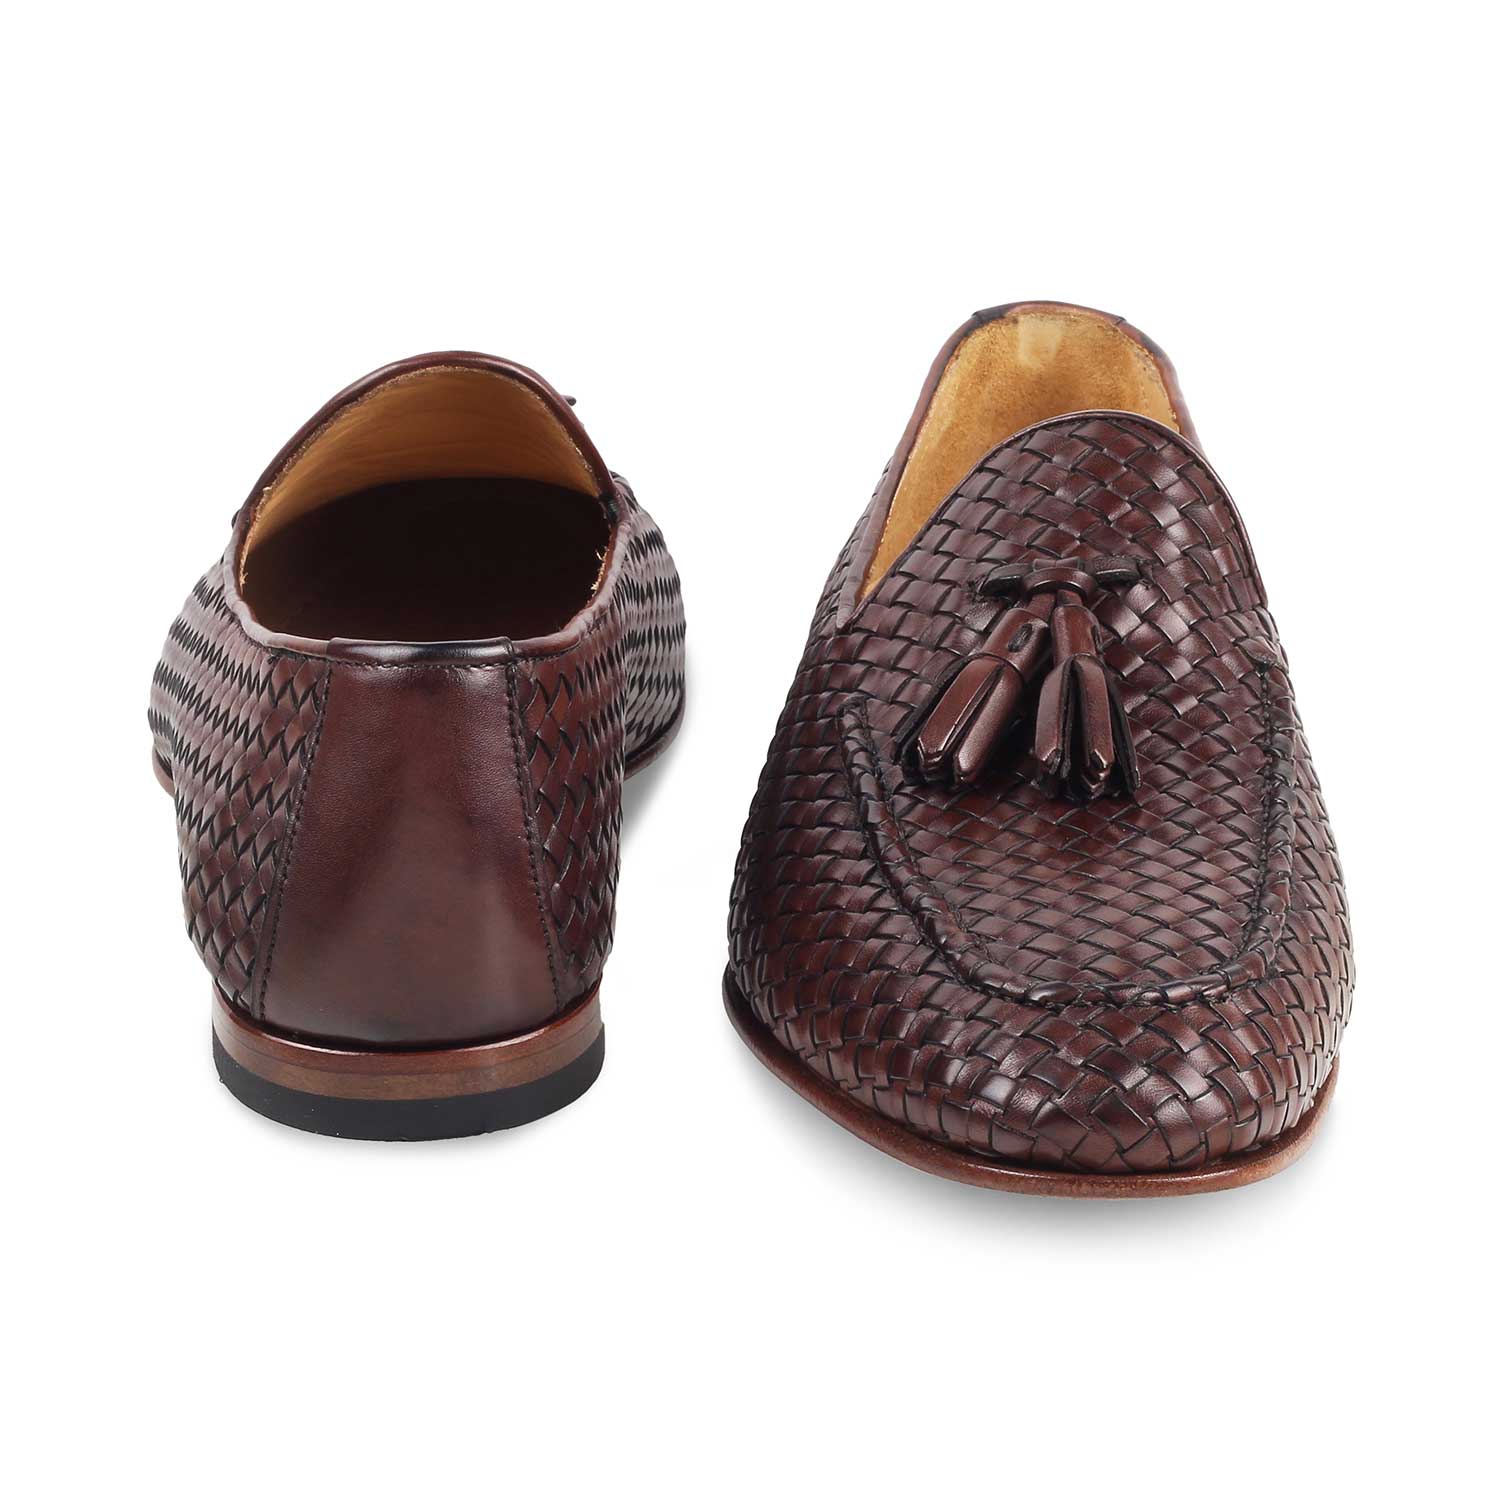 The Brucato Brown Men's Handcrafted Leather Loafers Tresmode - Tresmode